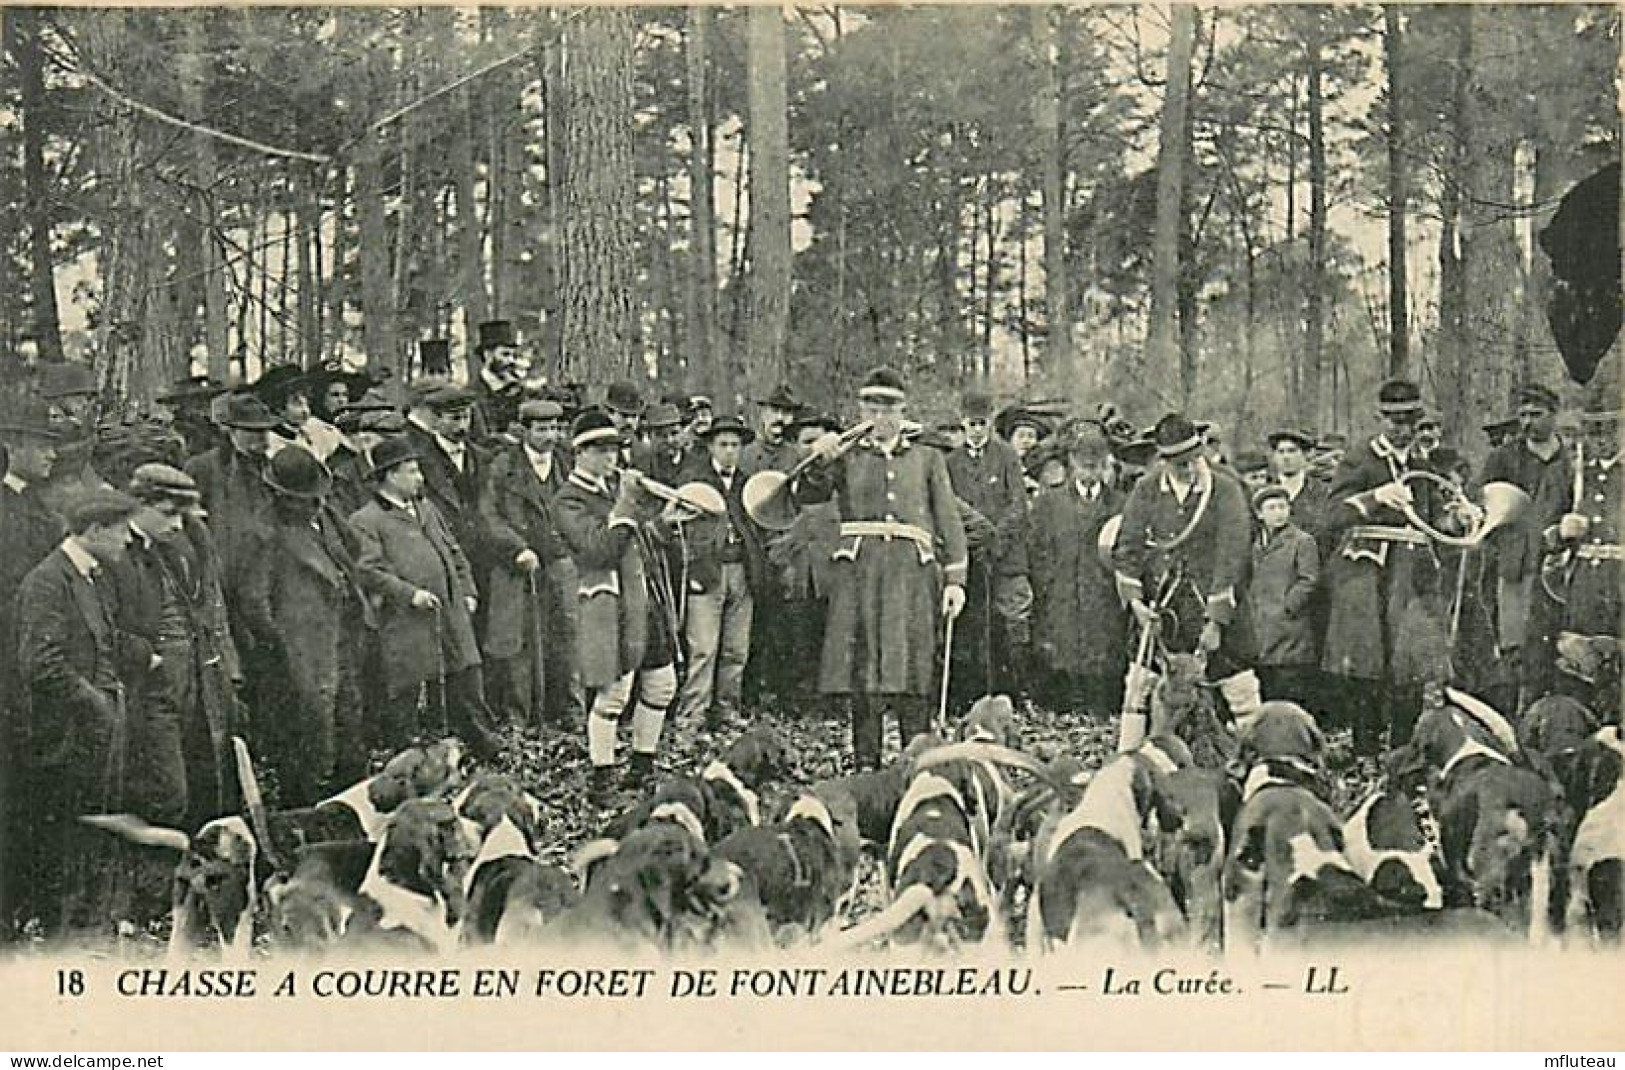 77* FONTAINEBLEAU Chasse A Courre la Curee   RL08.0157 - Chasse